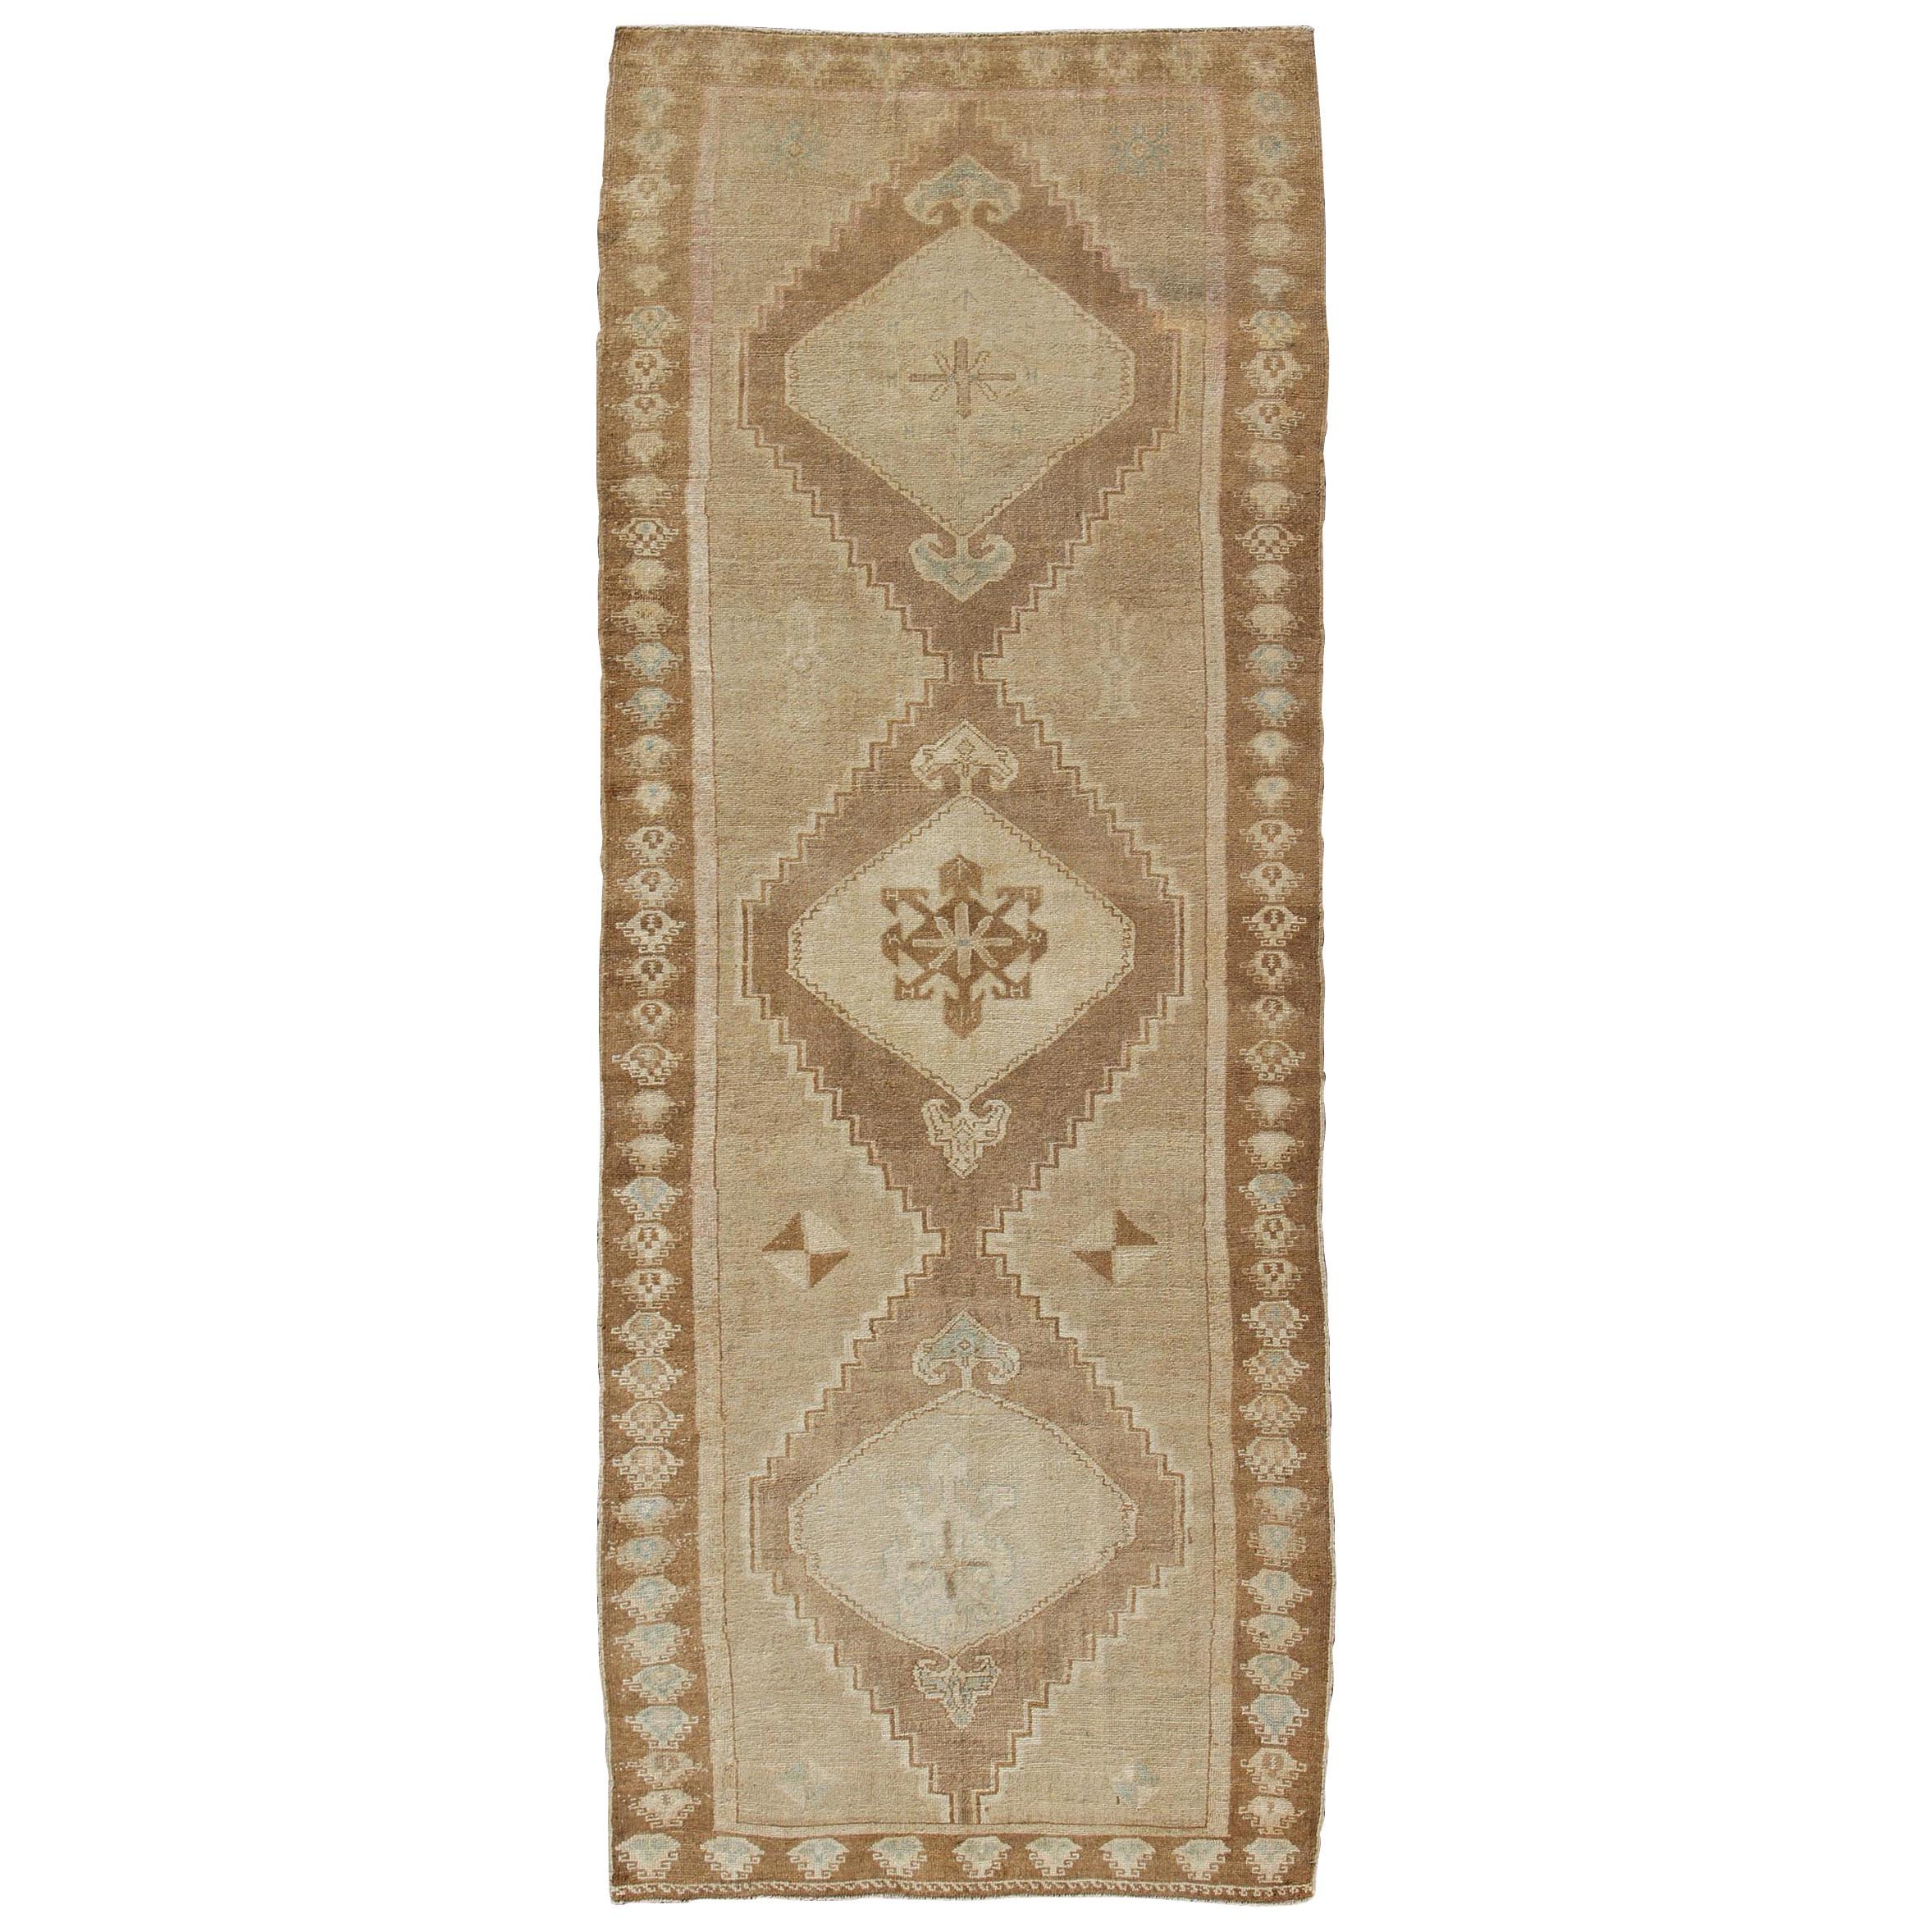 Large Gallery Turkish Rug in Earth Tones, Light Brown with Three Medallions For Sale